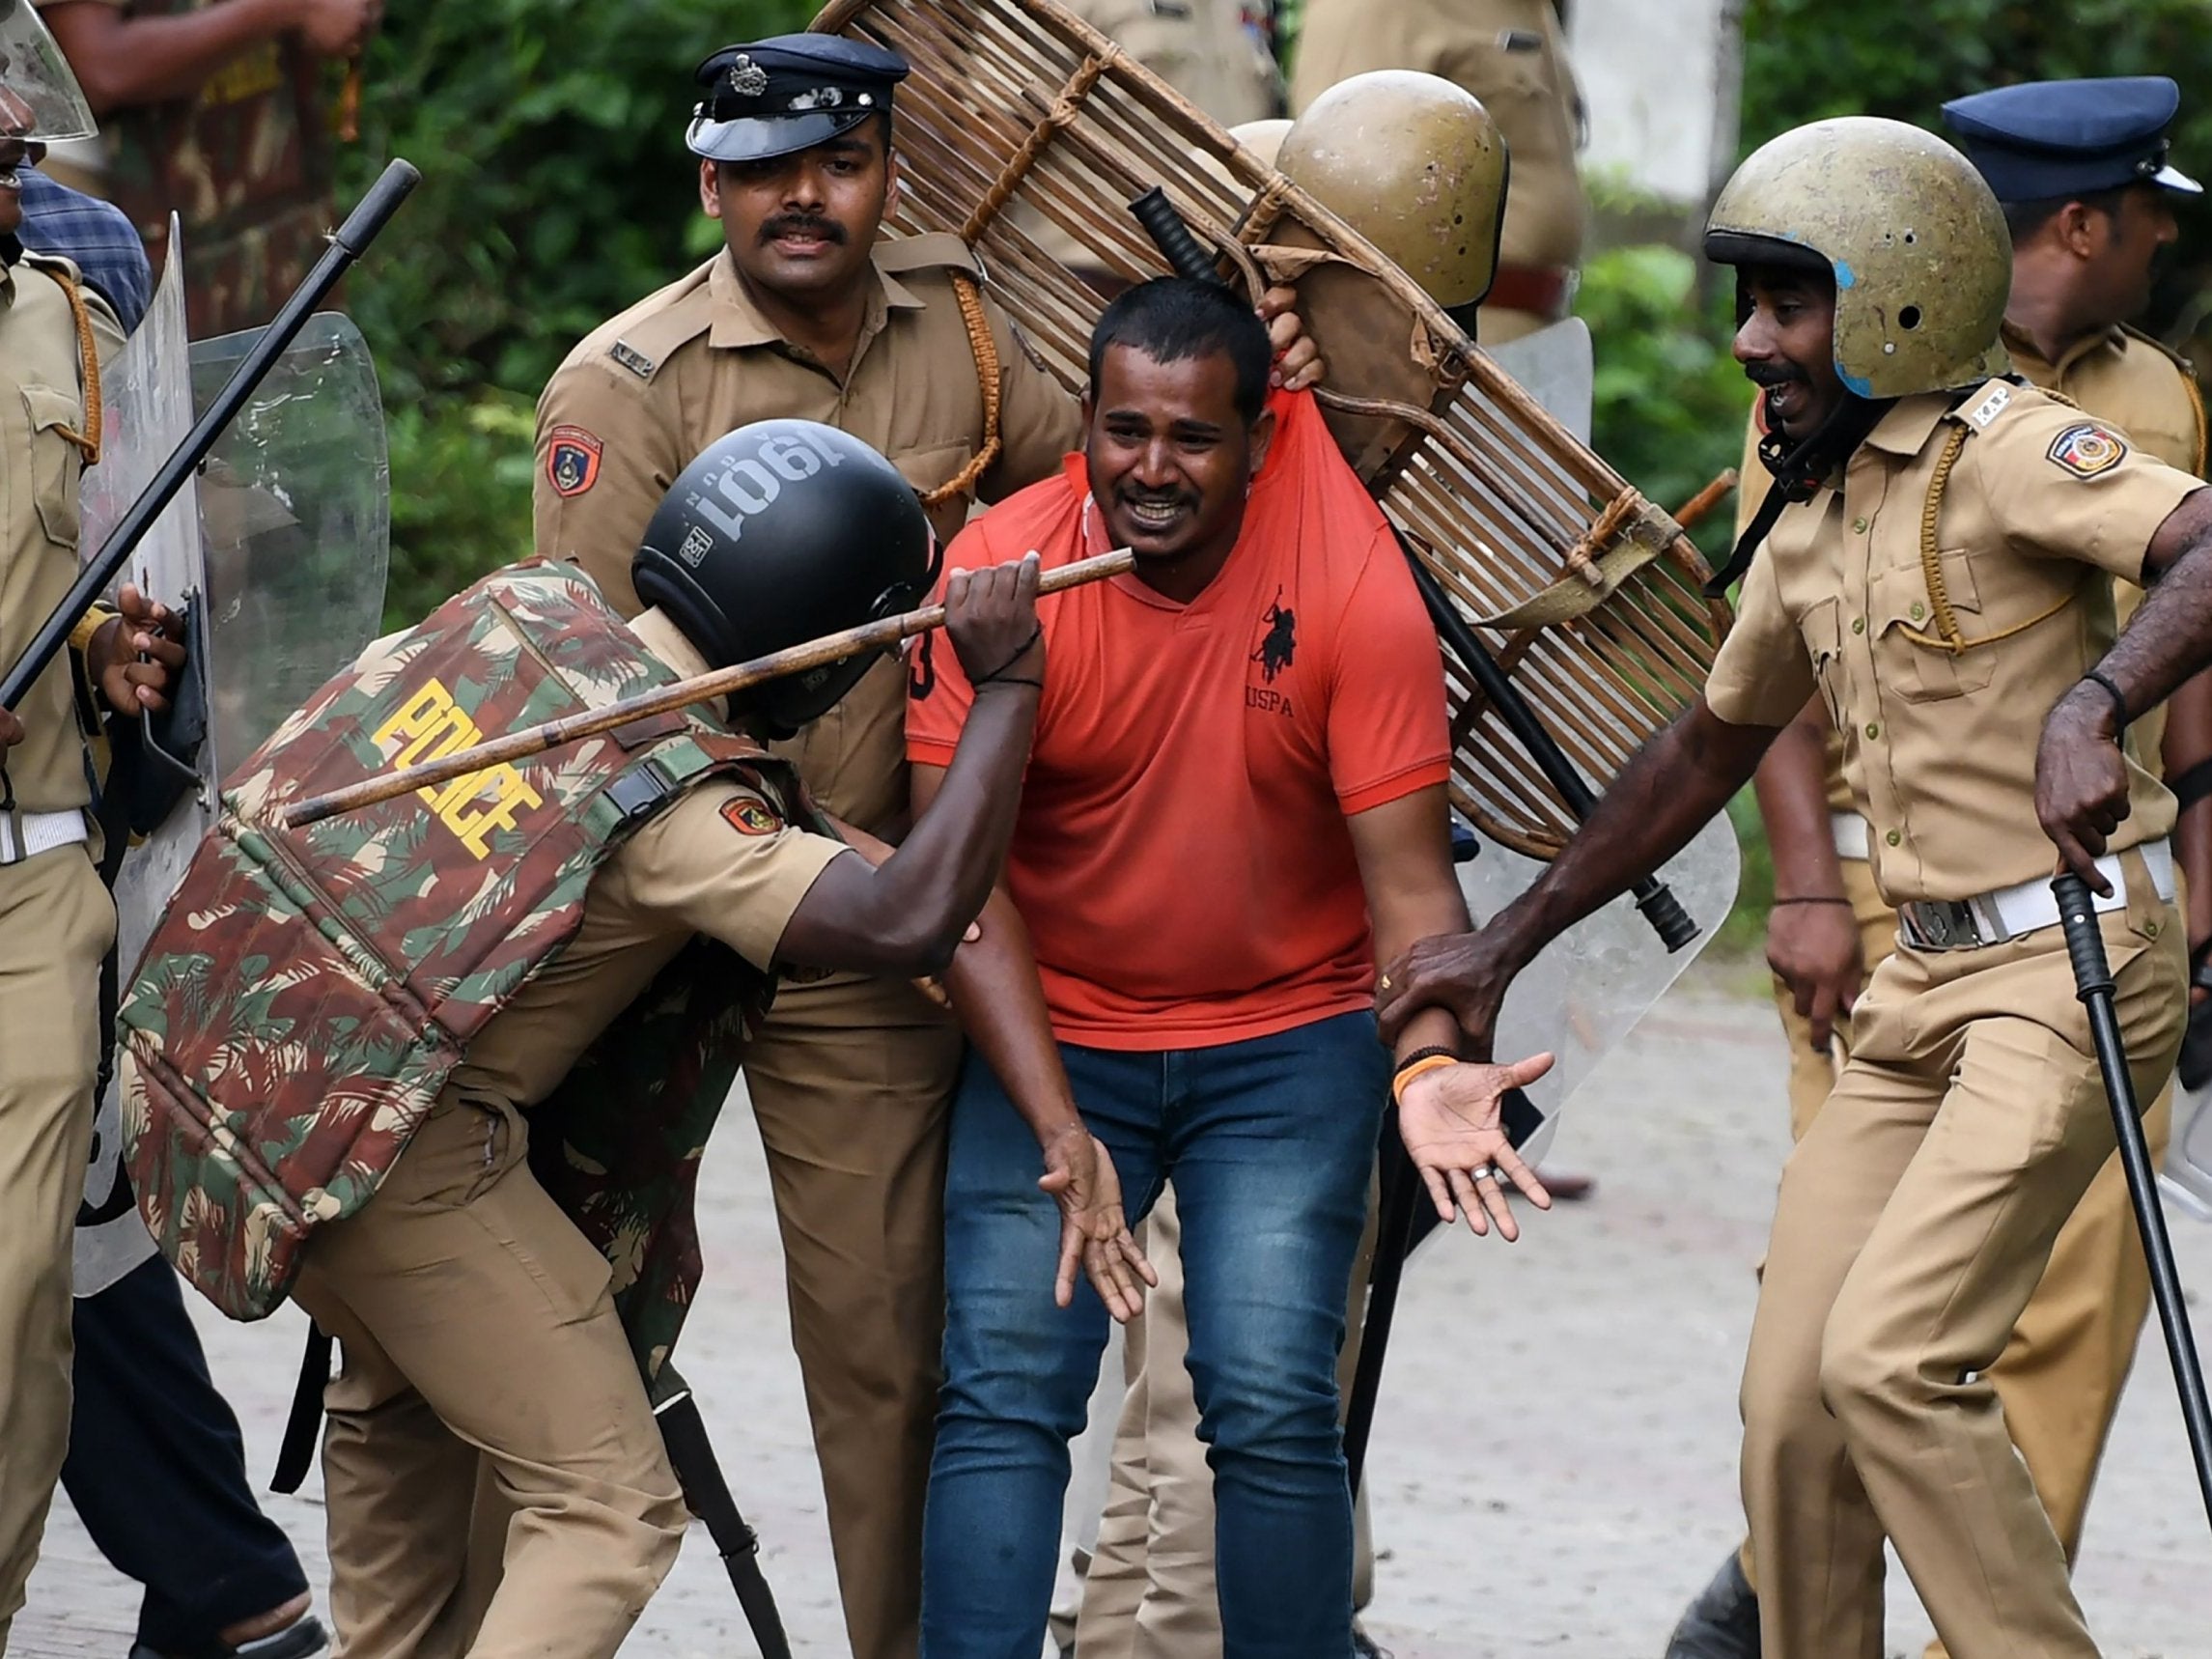 Indian police beat a Hindu activist as he pleads for his own safety as protesters rallied against a Supreme Court verdict revoking a ban on women's entry to a Hindu temple